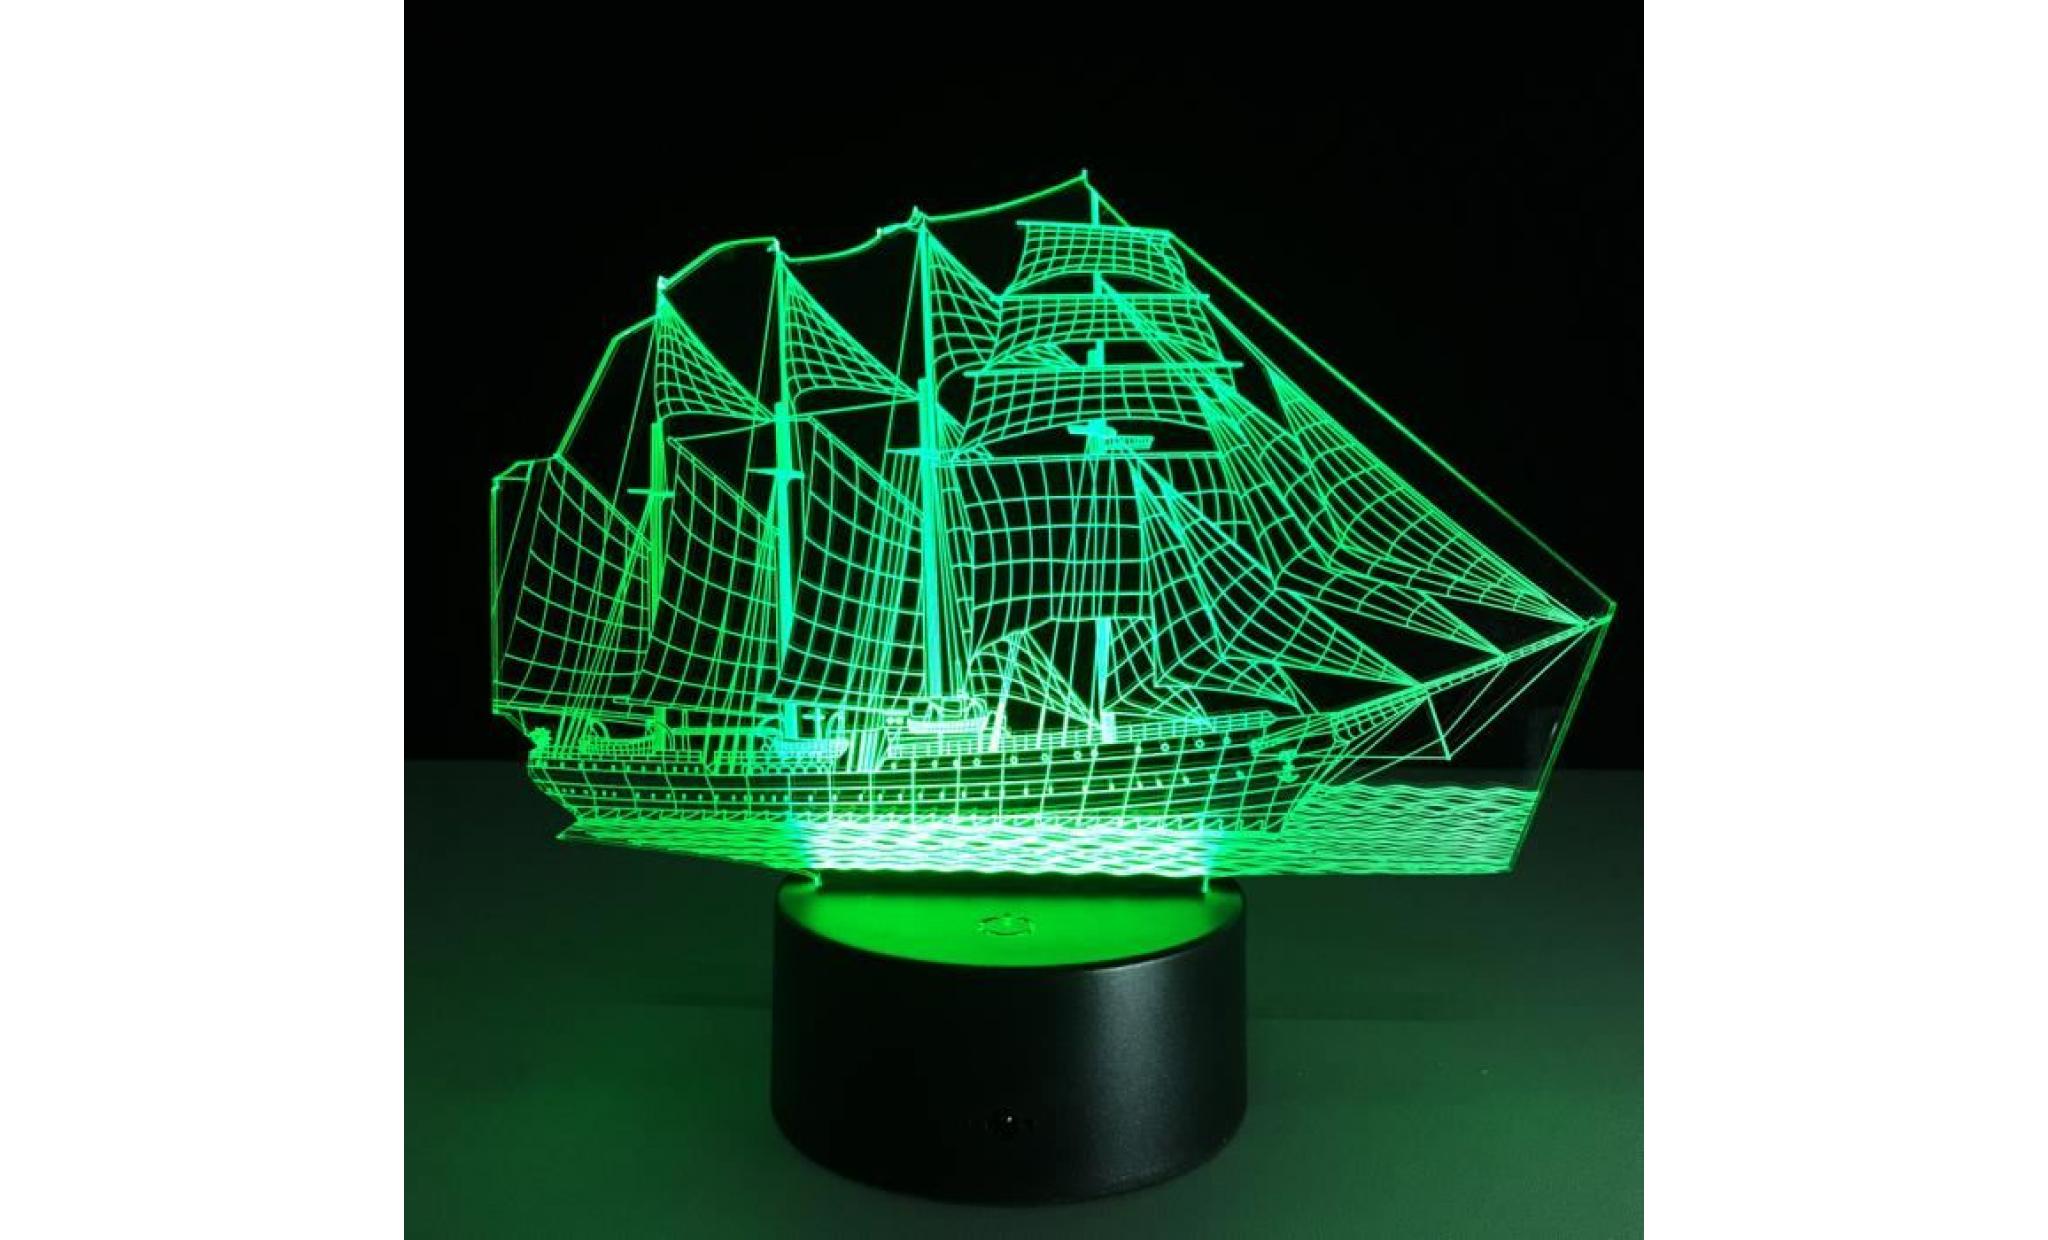 sailboat 3d illusion led night light 7 color touchswitch table desk lamp gift pageare1712 pageare1712